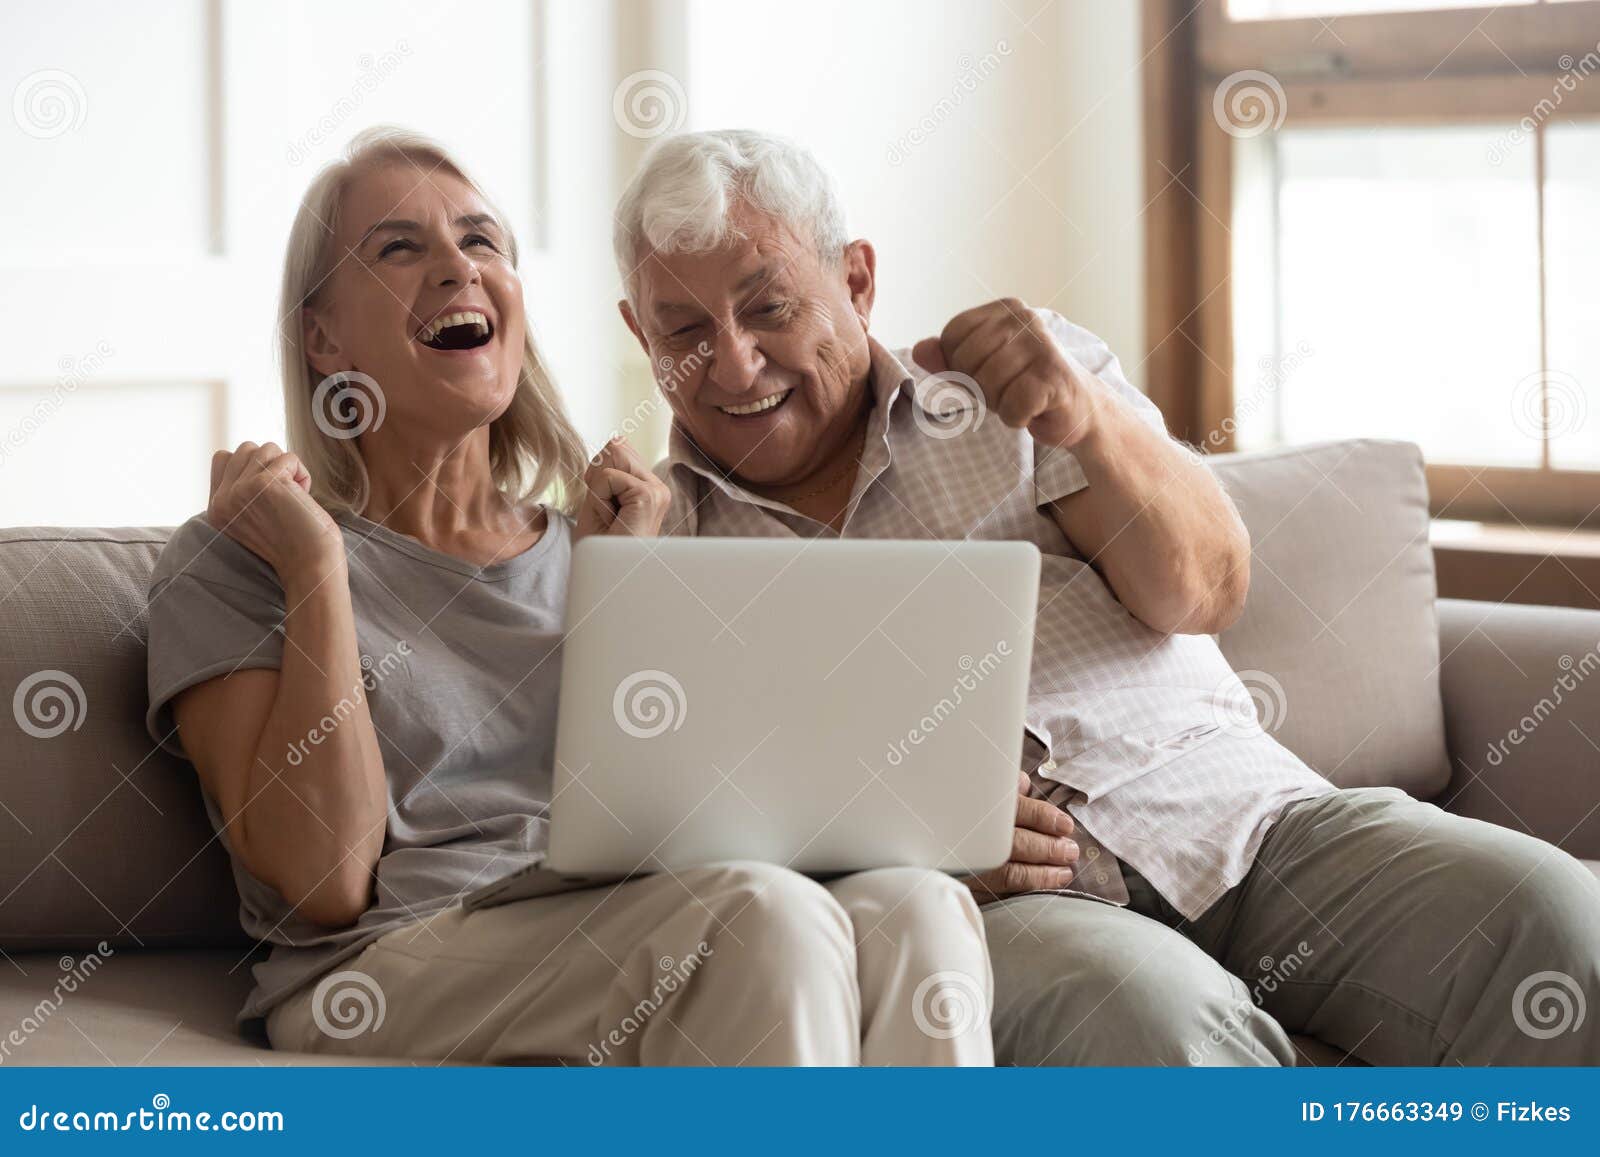 excited older wife and husband celebrating online win, using laptop